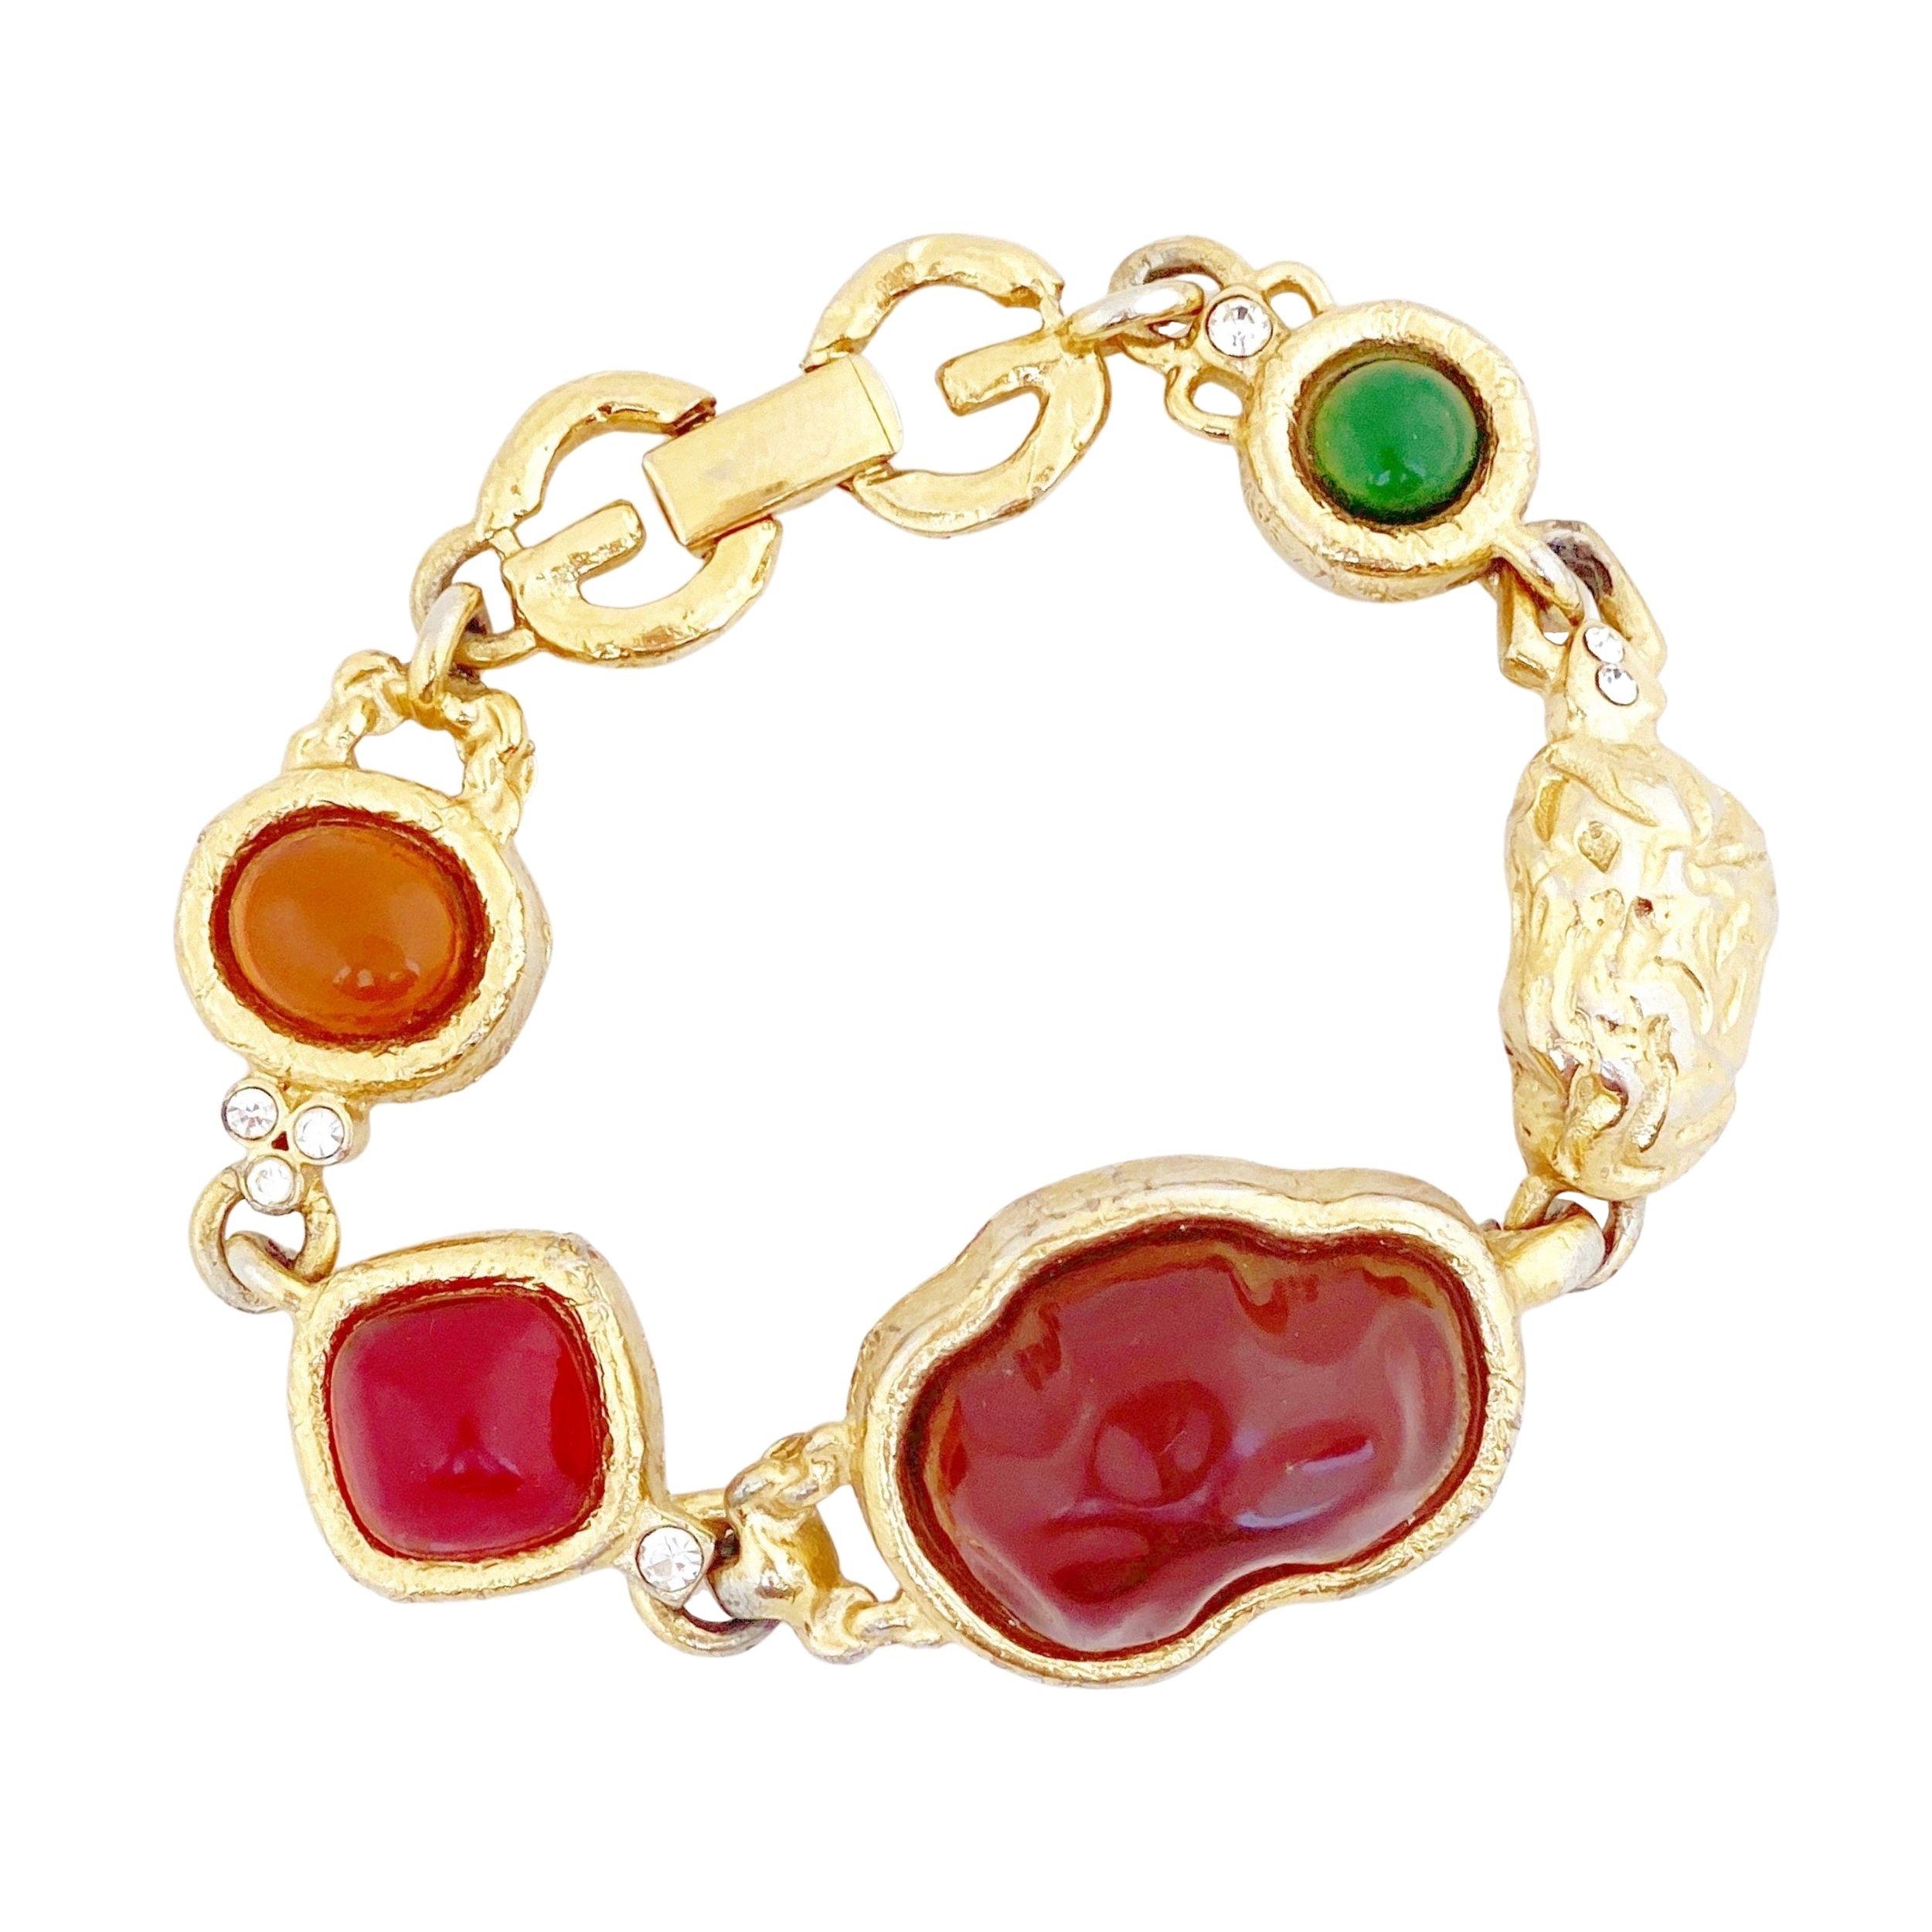 Gold & Resin Cabochon Organic Link Bracelet With Logo Clasp By Givenchy, 1980s For Sale